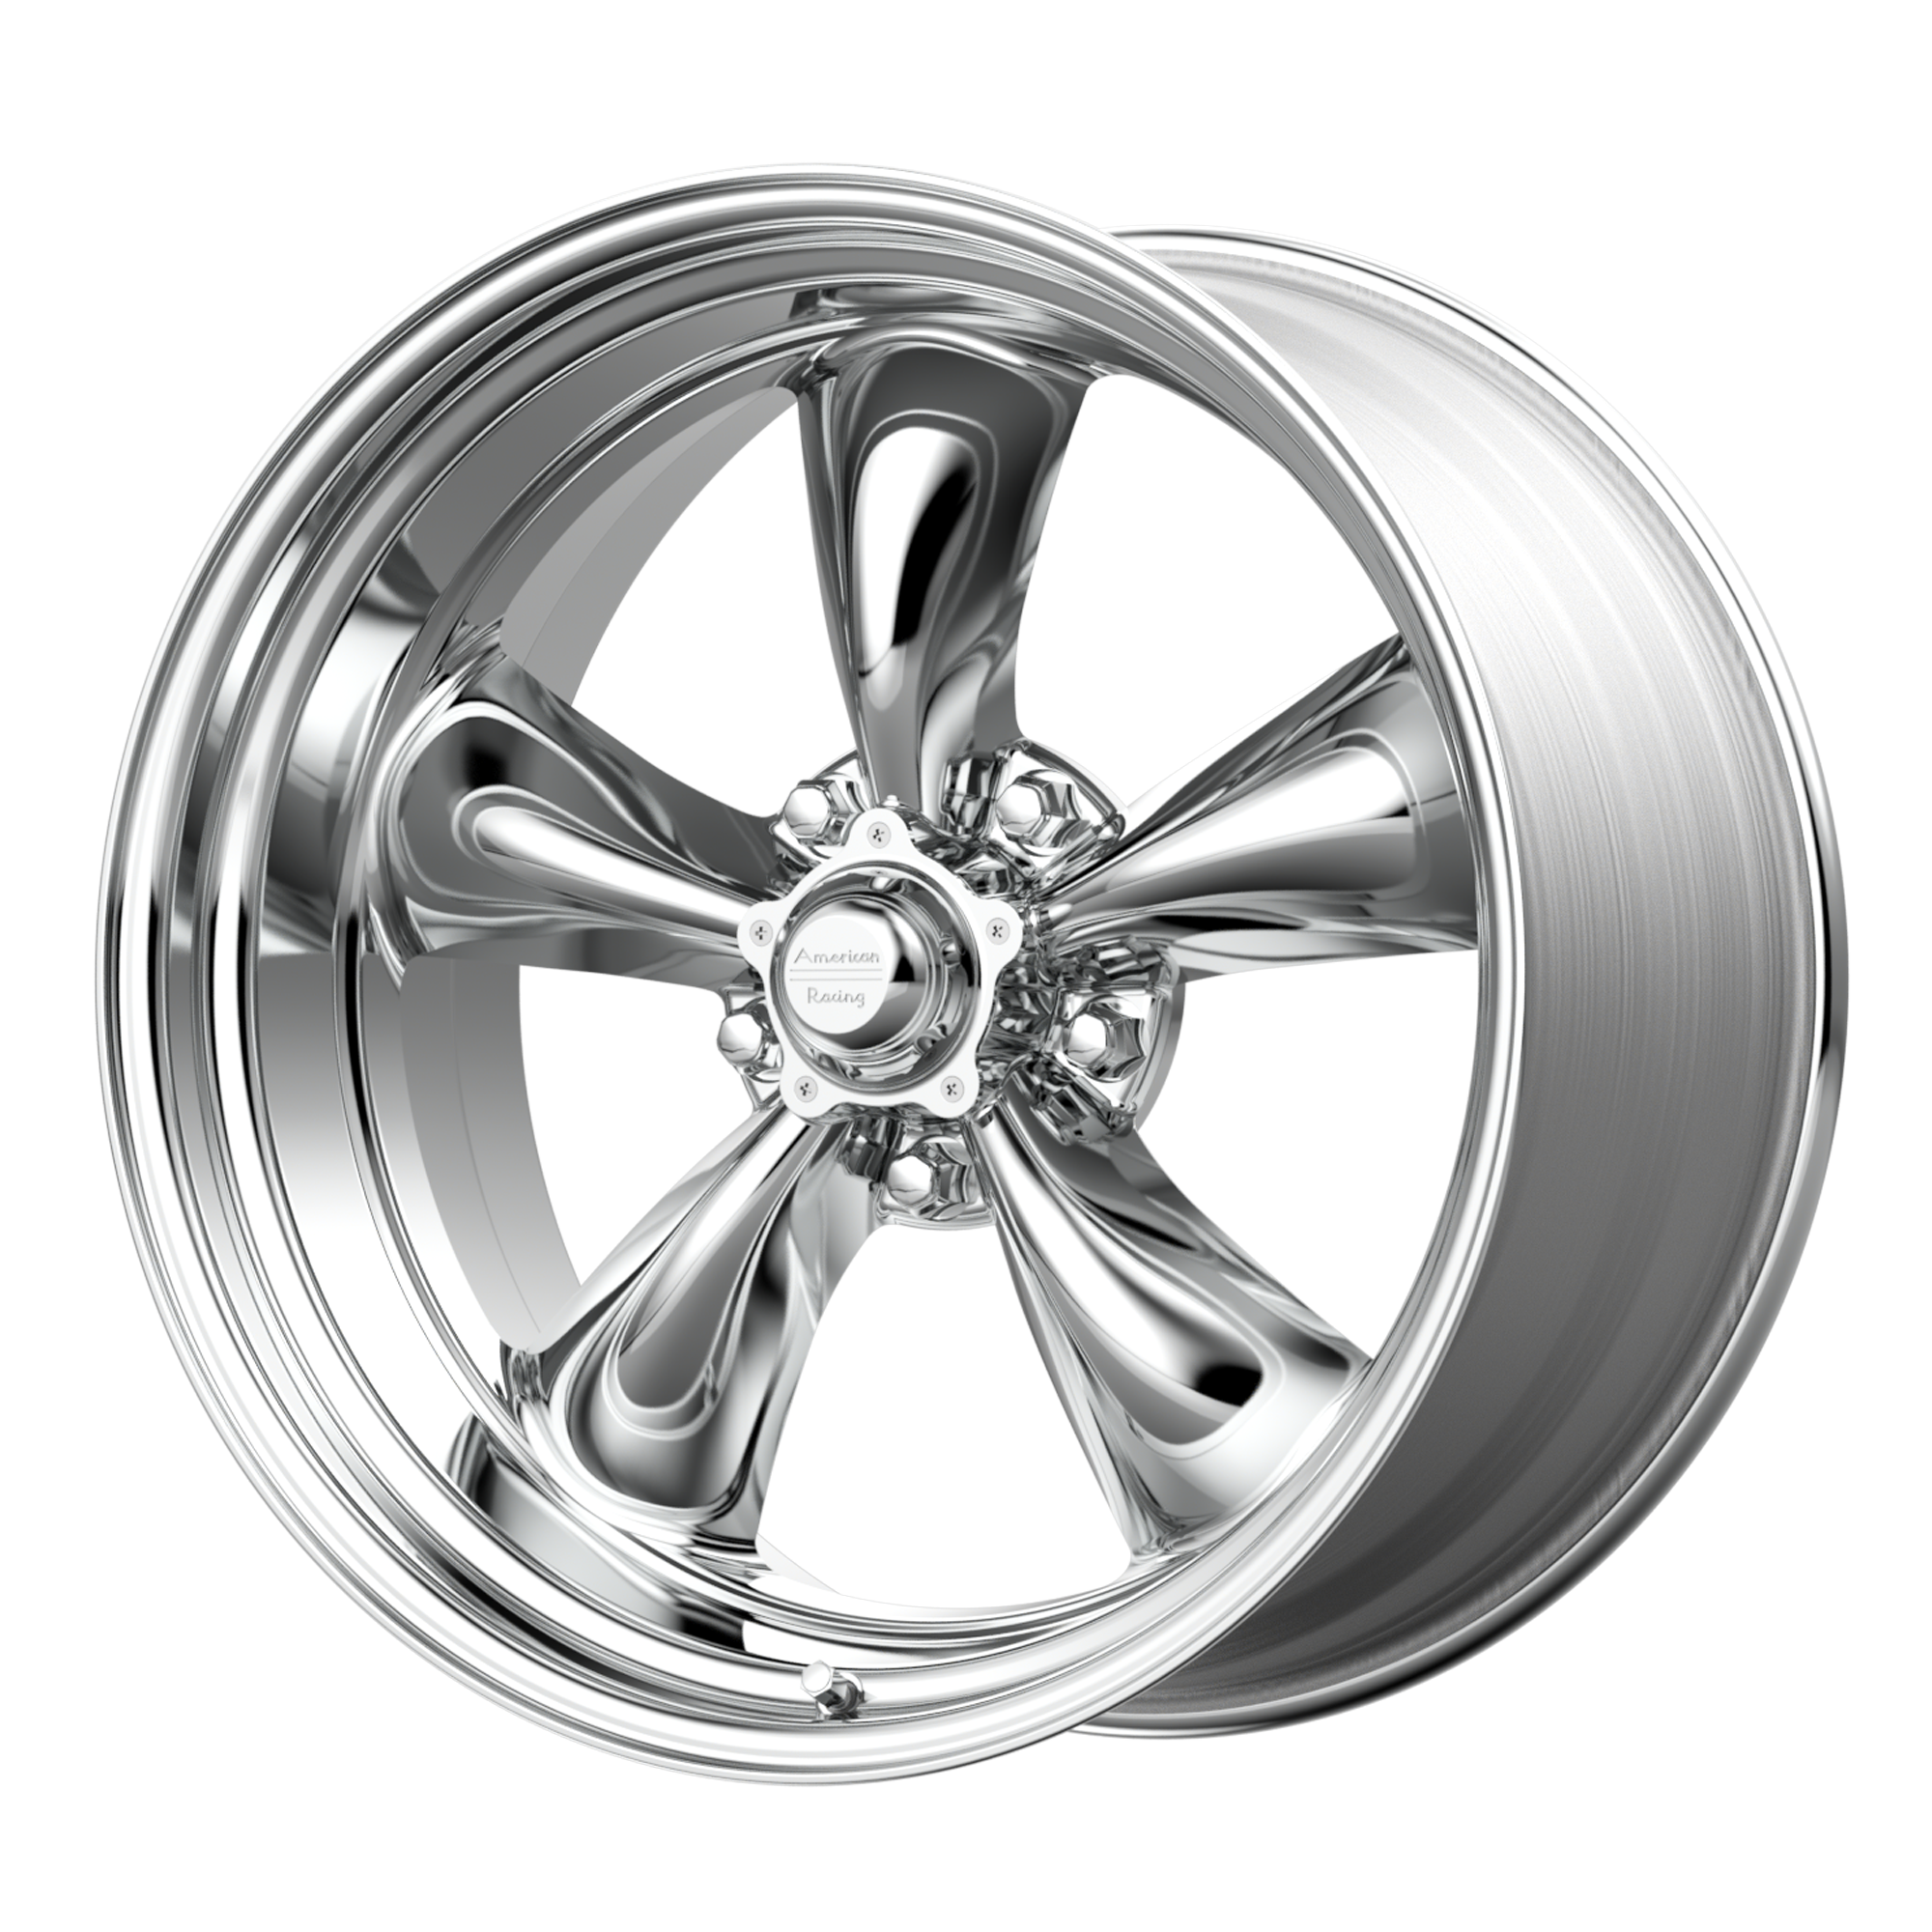 TORQ THRUST II 1 PC 16x8 5x120.65 POLISHED (8 mm) - Tires and Engine Performance